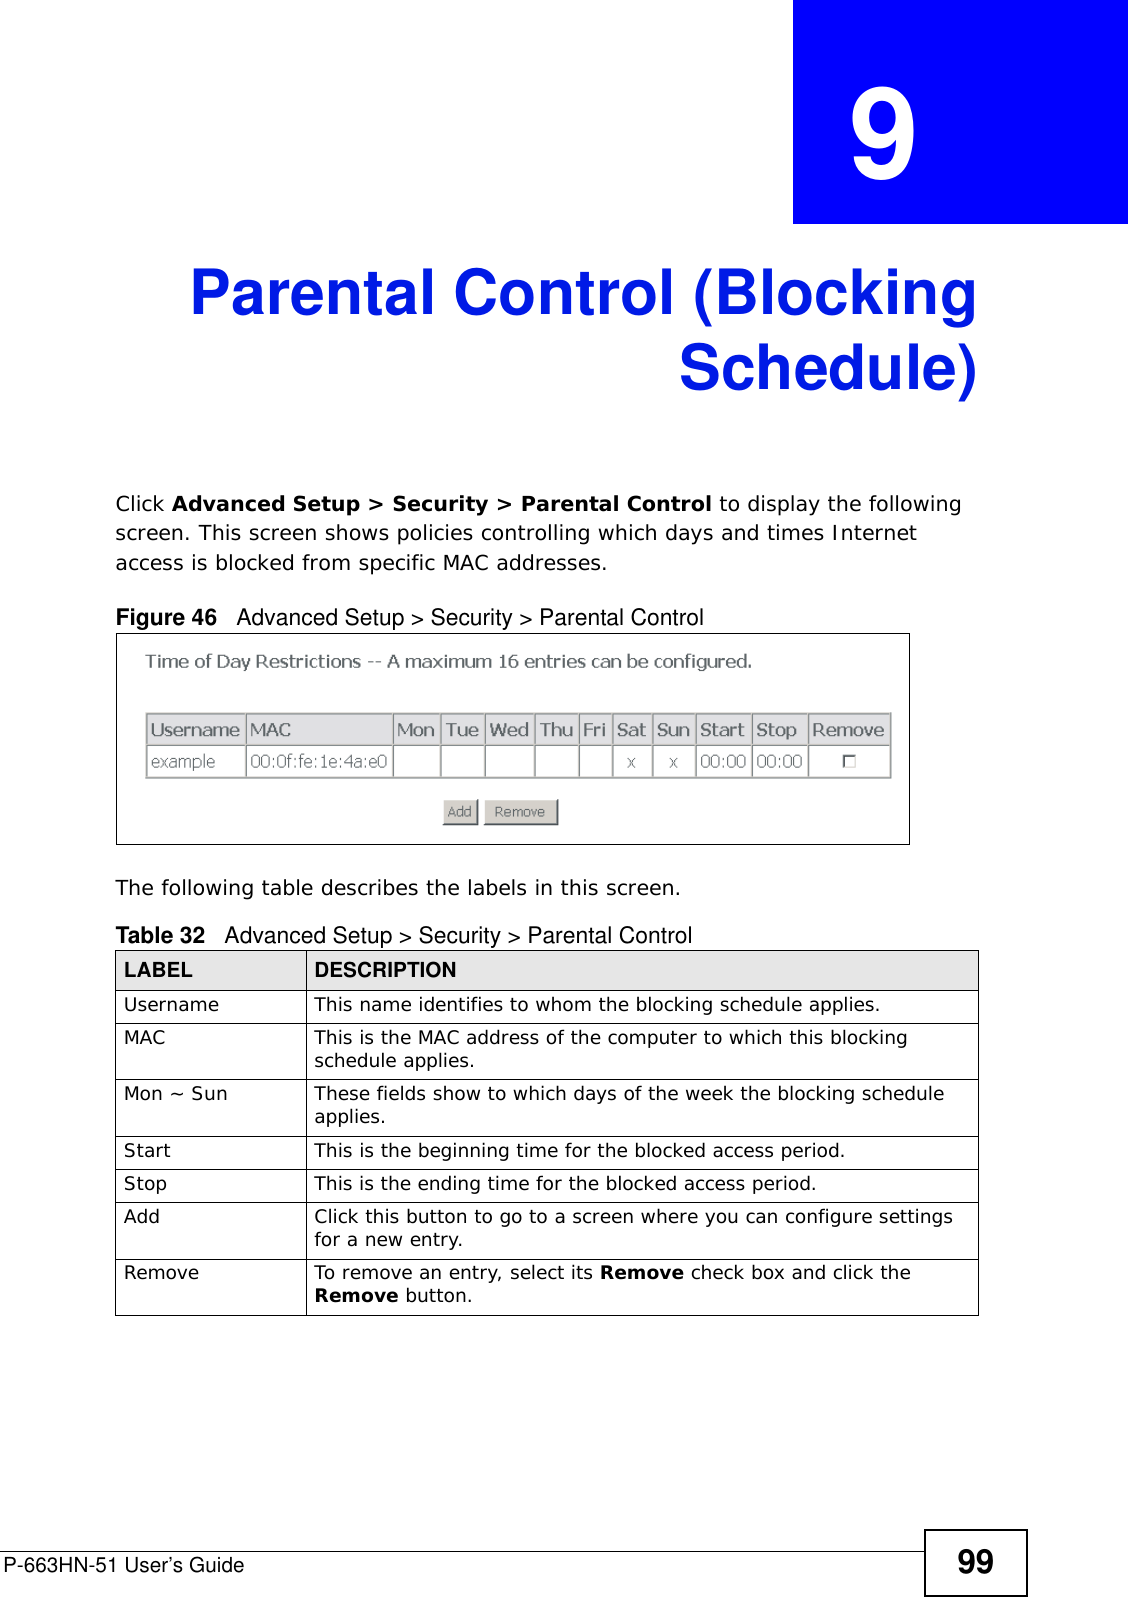 P-663HN-51 User’s Guide 99CHAPTER  9 Parental Control (BlockingSchedule)Click Advanced Setup &gt; Security &gt; Parental Control to display the following screen. This screen shows policies controlling which days and times Internet access is blocked from specific MAC addresses.Figure 46   Advanced Setup &gt; Security &gt; Parental Control The following table describes the labels in this screen. Table 32   Advanced Setup &gt; Security &gt; Parental ControlLABEL DESCRIPTIONUsername This name identifies to whom the blocking schedule applies. MAC This is the MAC address of the computer to which this blocking schedule applies. Mon ~ Sun  These fields show to which days of the week the blocking schedule applies.Start This is the beginning time for the blocked access period. Stop This is the ending time for the blocked access period. Add Click this button to go to a screen where you can configure settings for a new entry.Remove To remove an entry, select its Remove check box and click the Remove button. 